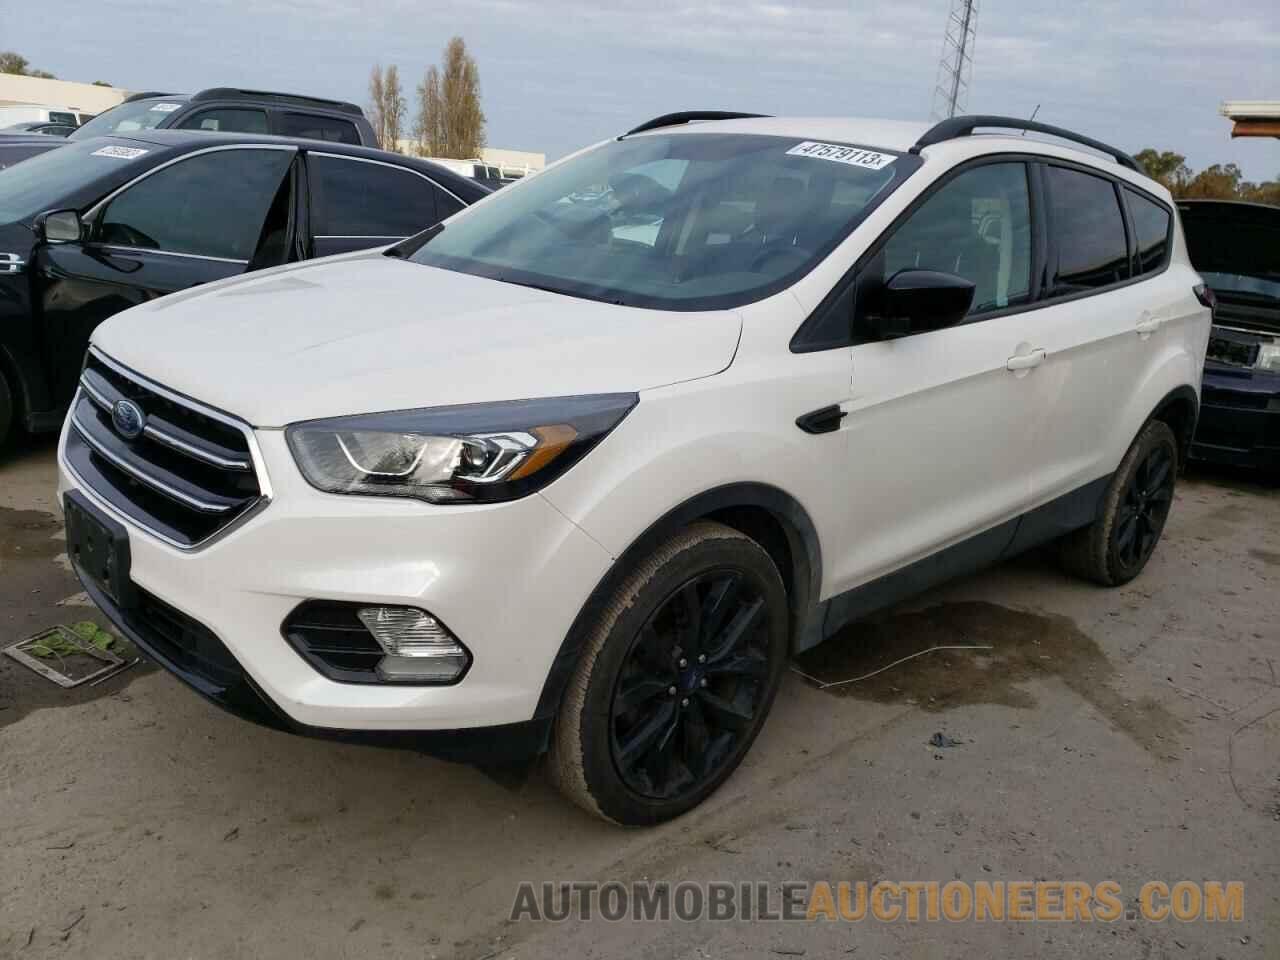 1FMCU0GD7JUD29889 FORD ESCAPE 2018